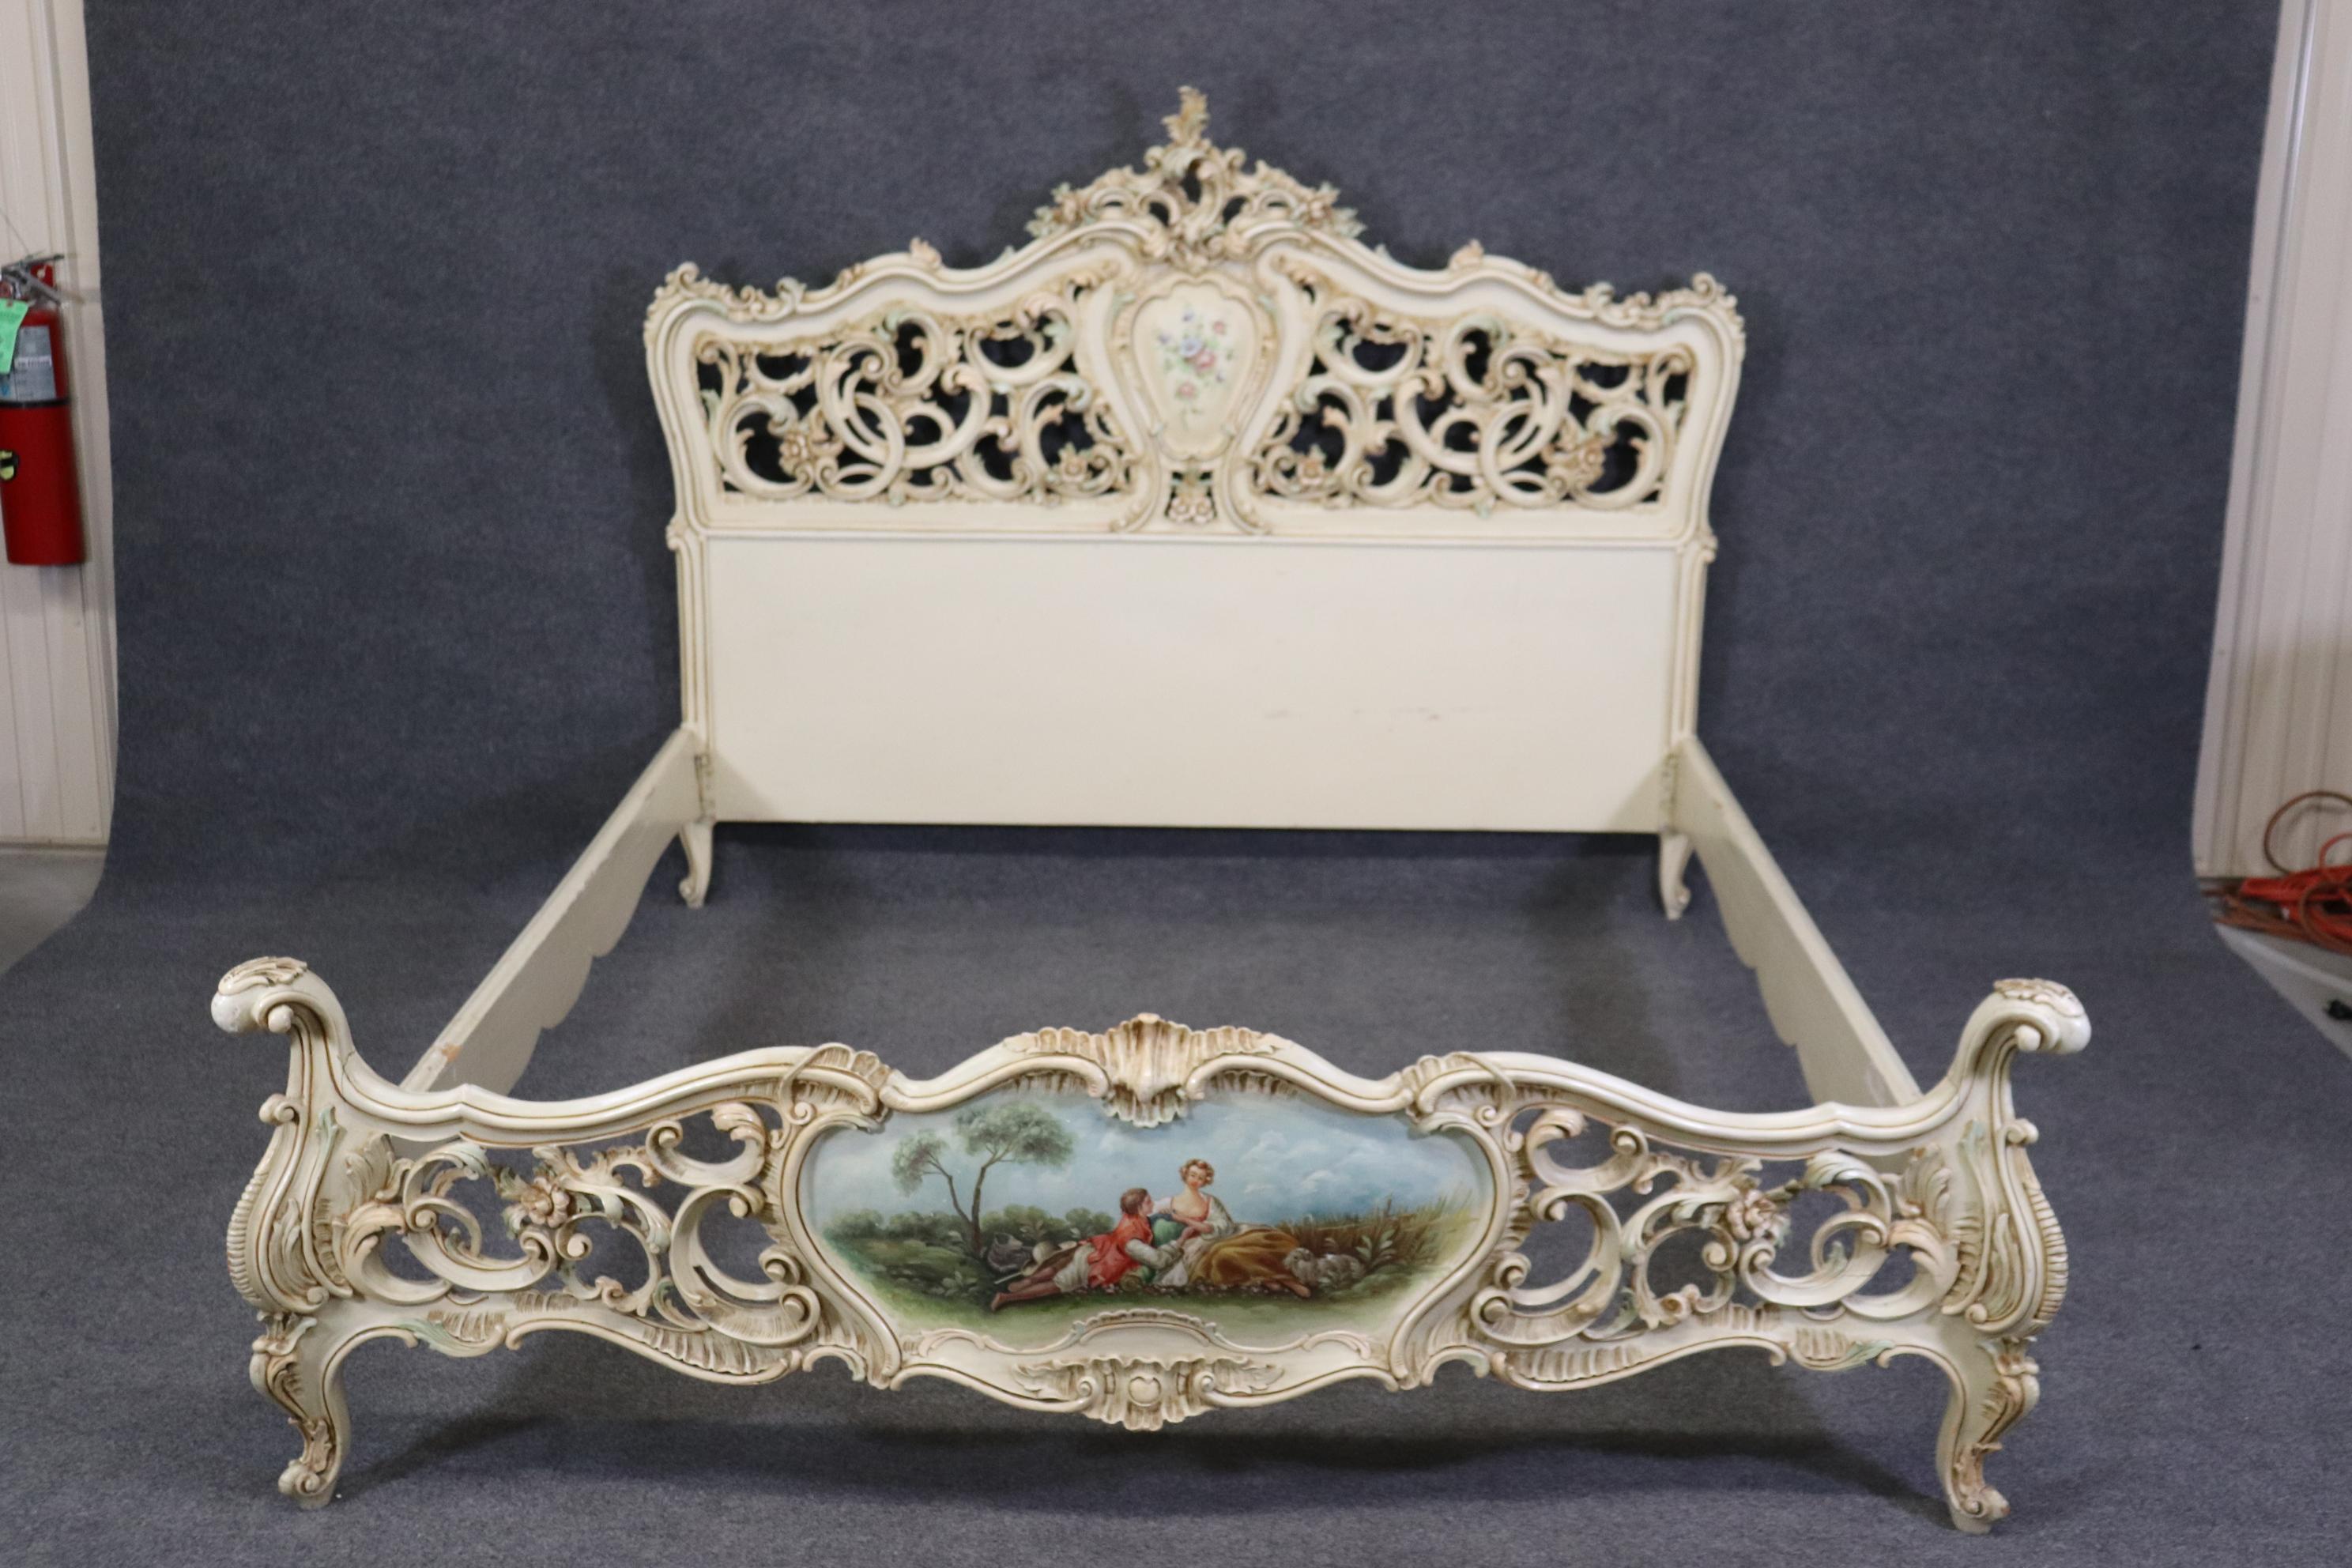 This is a gorgeous Vernis Martin paint decorated bed with a courtship scene. This bed is beautifully carved and has absolutely gorgeous paint decorated scenery. The bed dates to the 1950s era and is ITALIAN which means its not a standard American